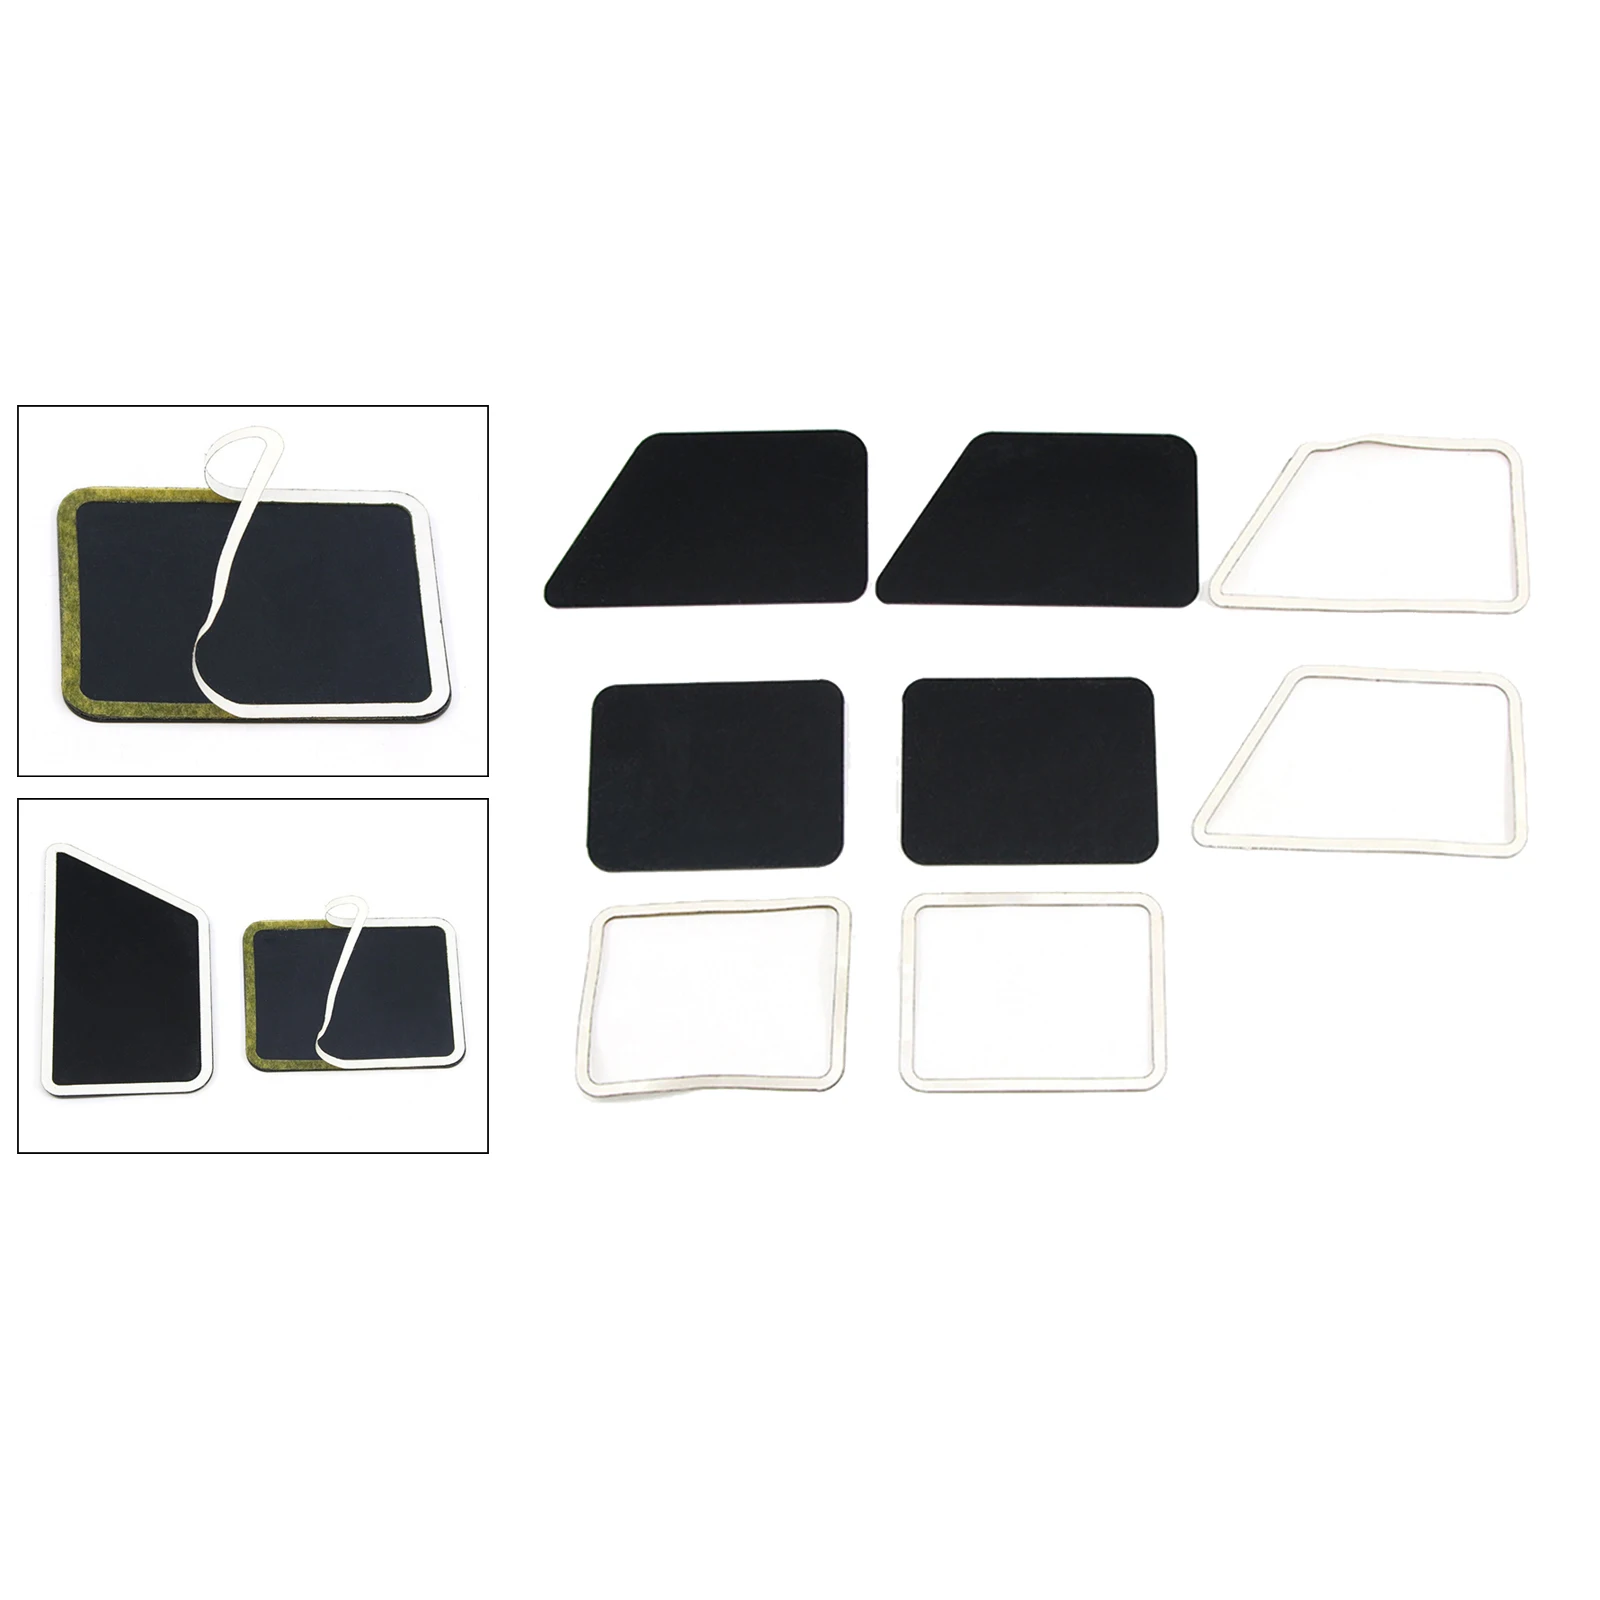 1Set/4pcs Durable RC Car Windows for SCX10 Simulation Climbing Car Upgrade Parts Easy to Install